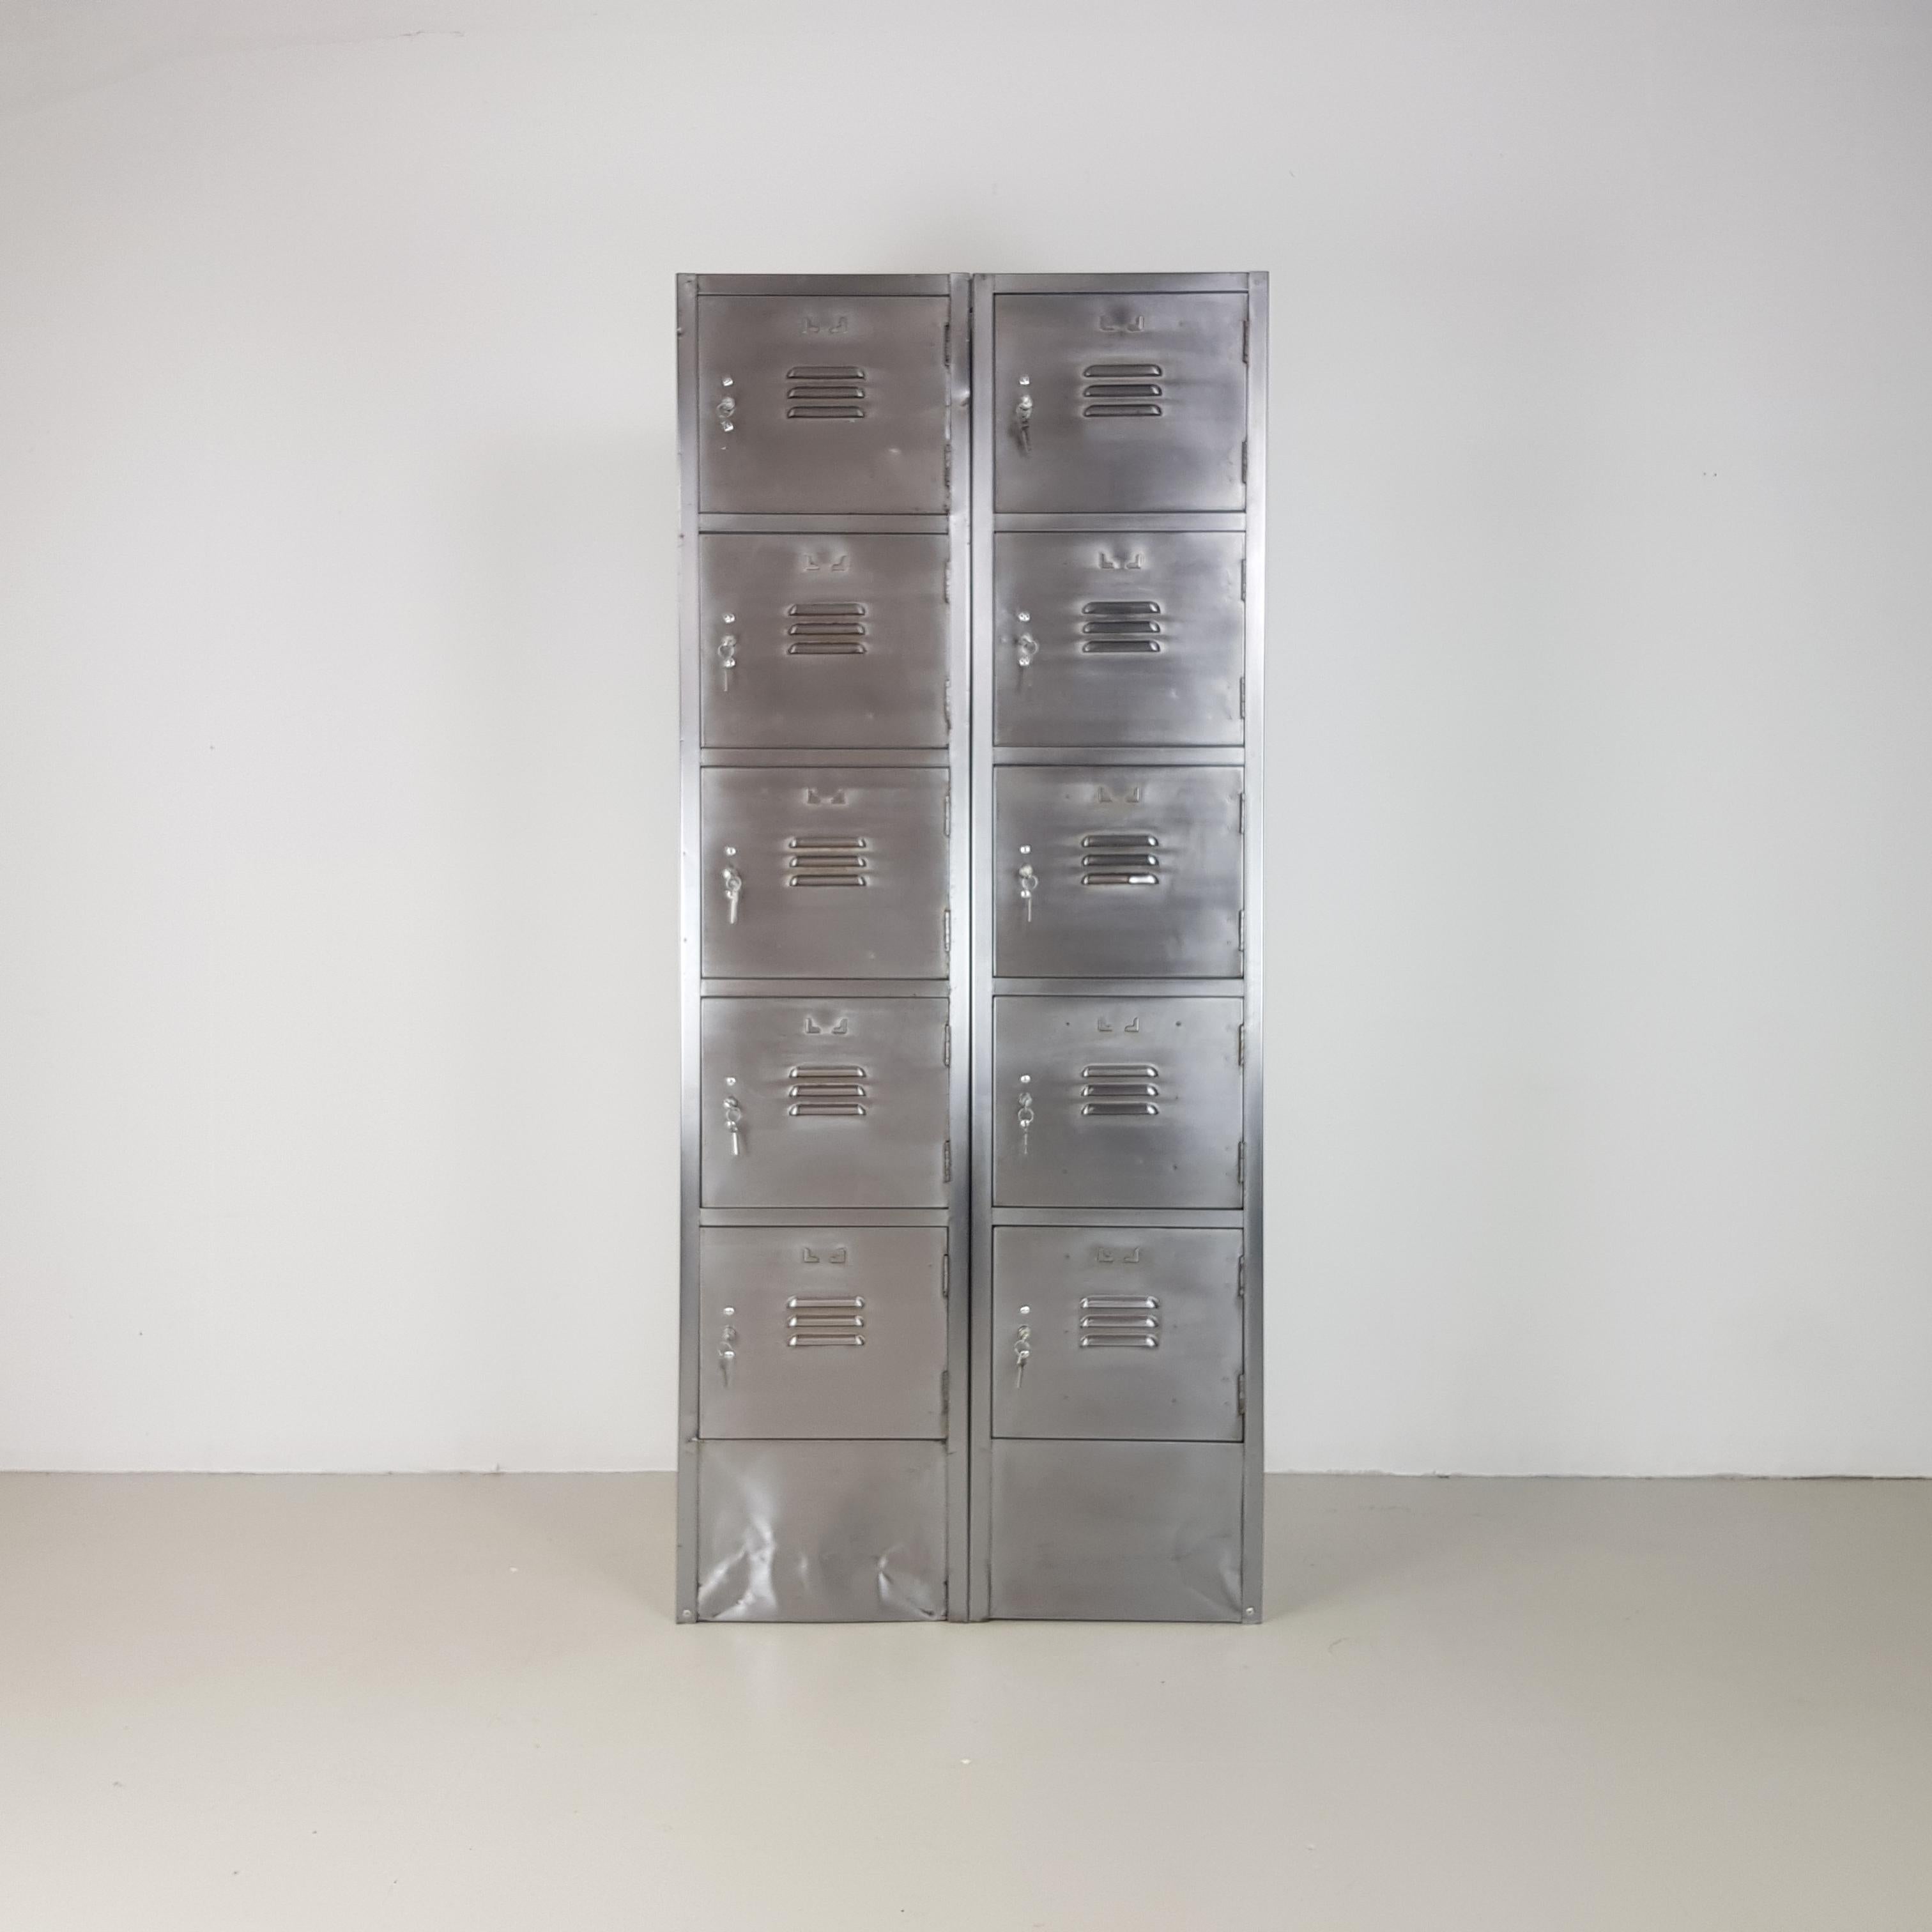 British Vintage Industrial Ten Compartment Stripped and Polished Steel School Locker